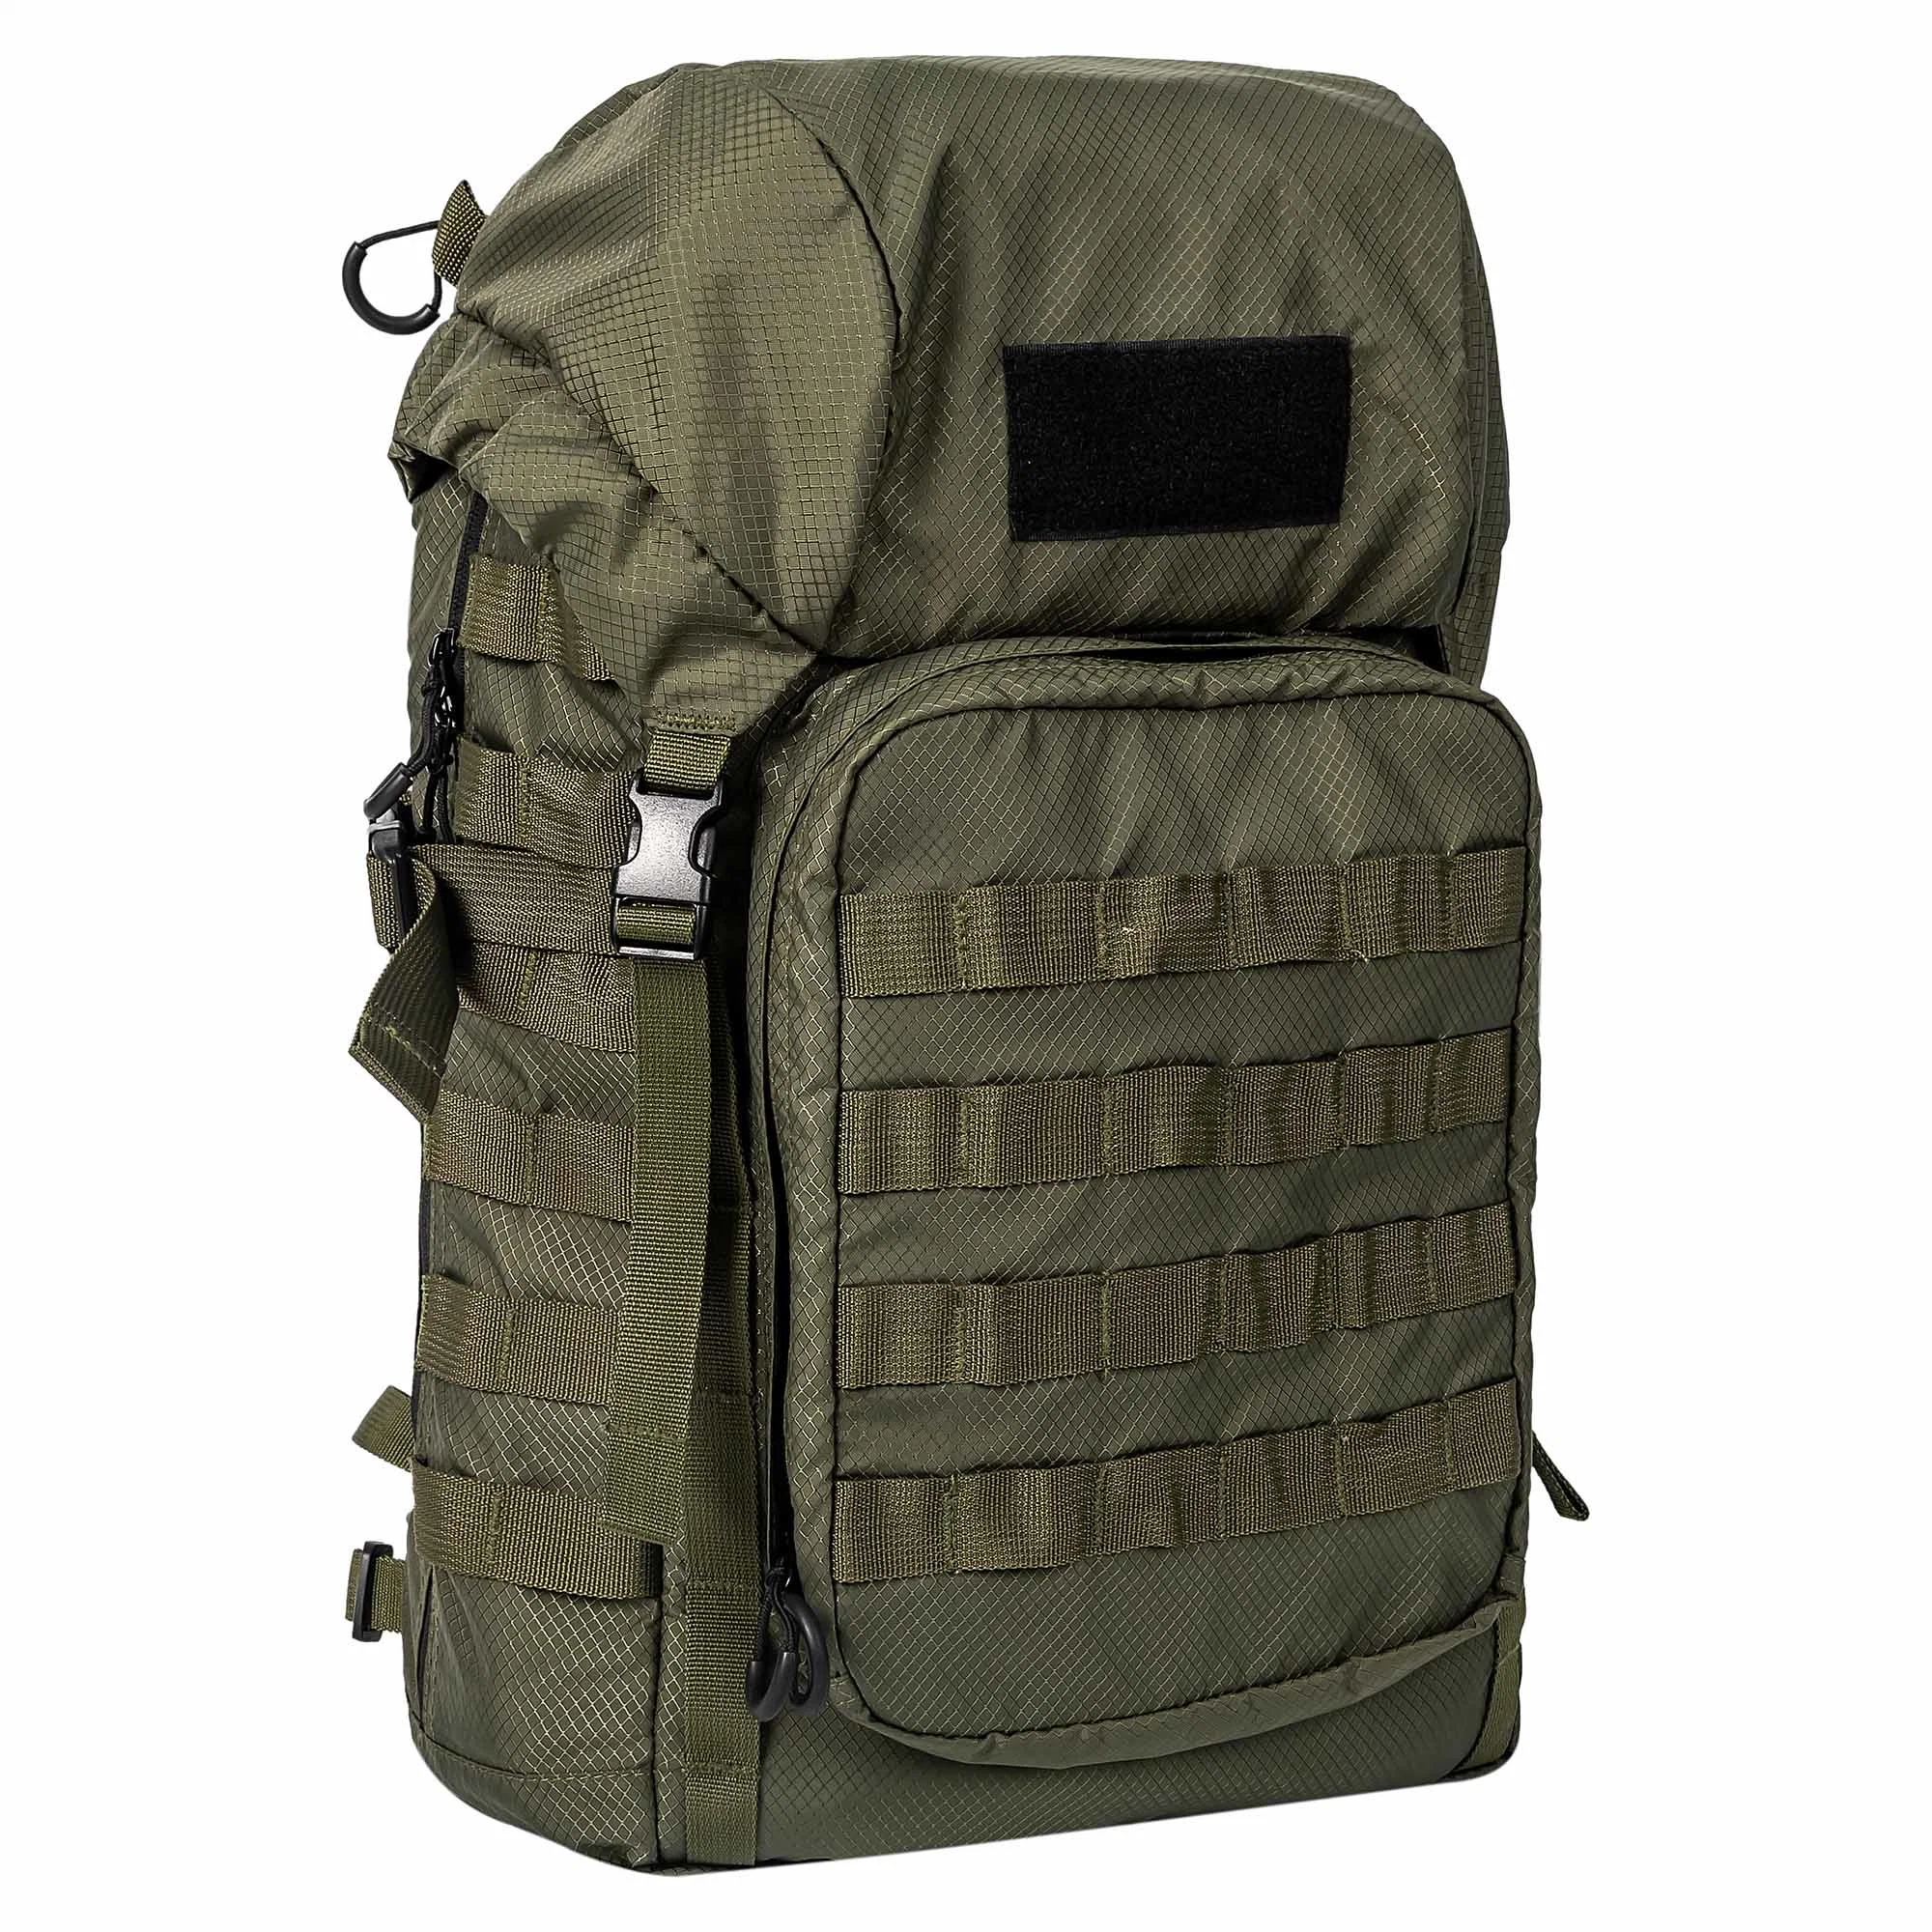 Tactical Bag Backpack Mountaineering Men Travel Outdoor Sport Bags Molle Backpacks Hunting Camping Rucksack